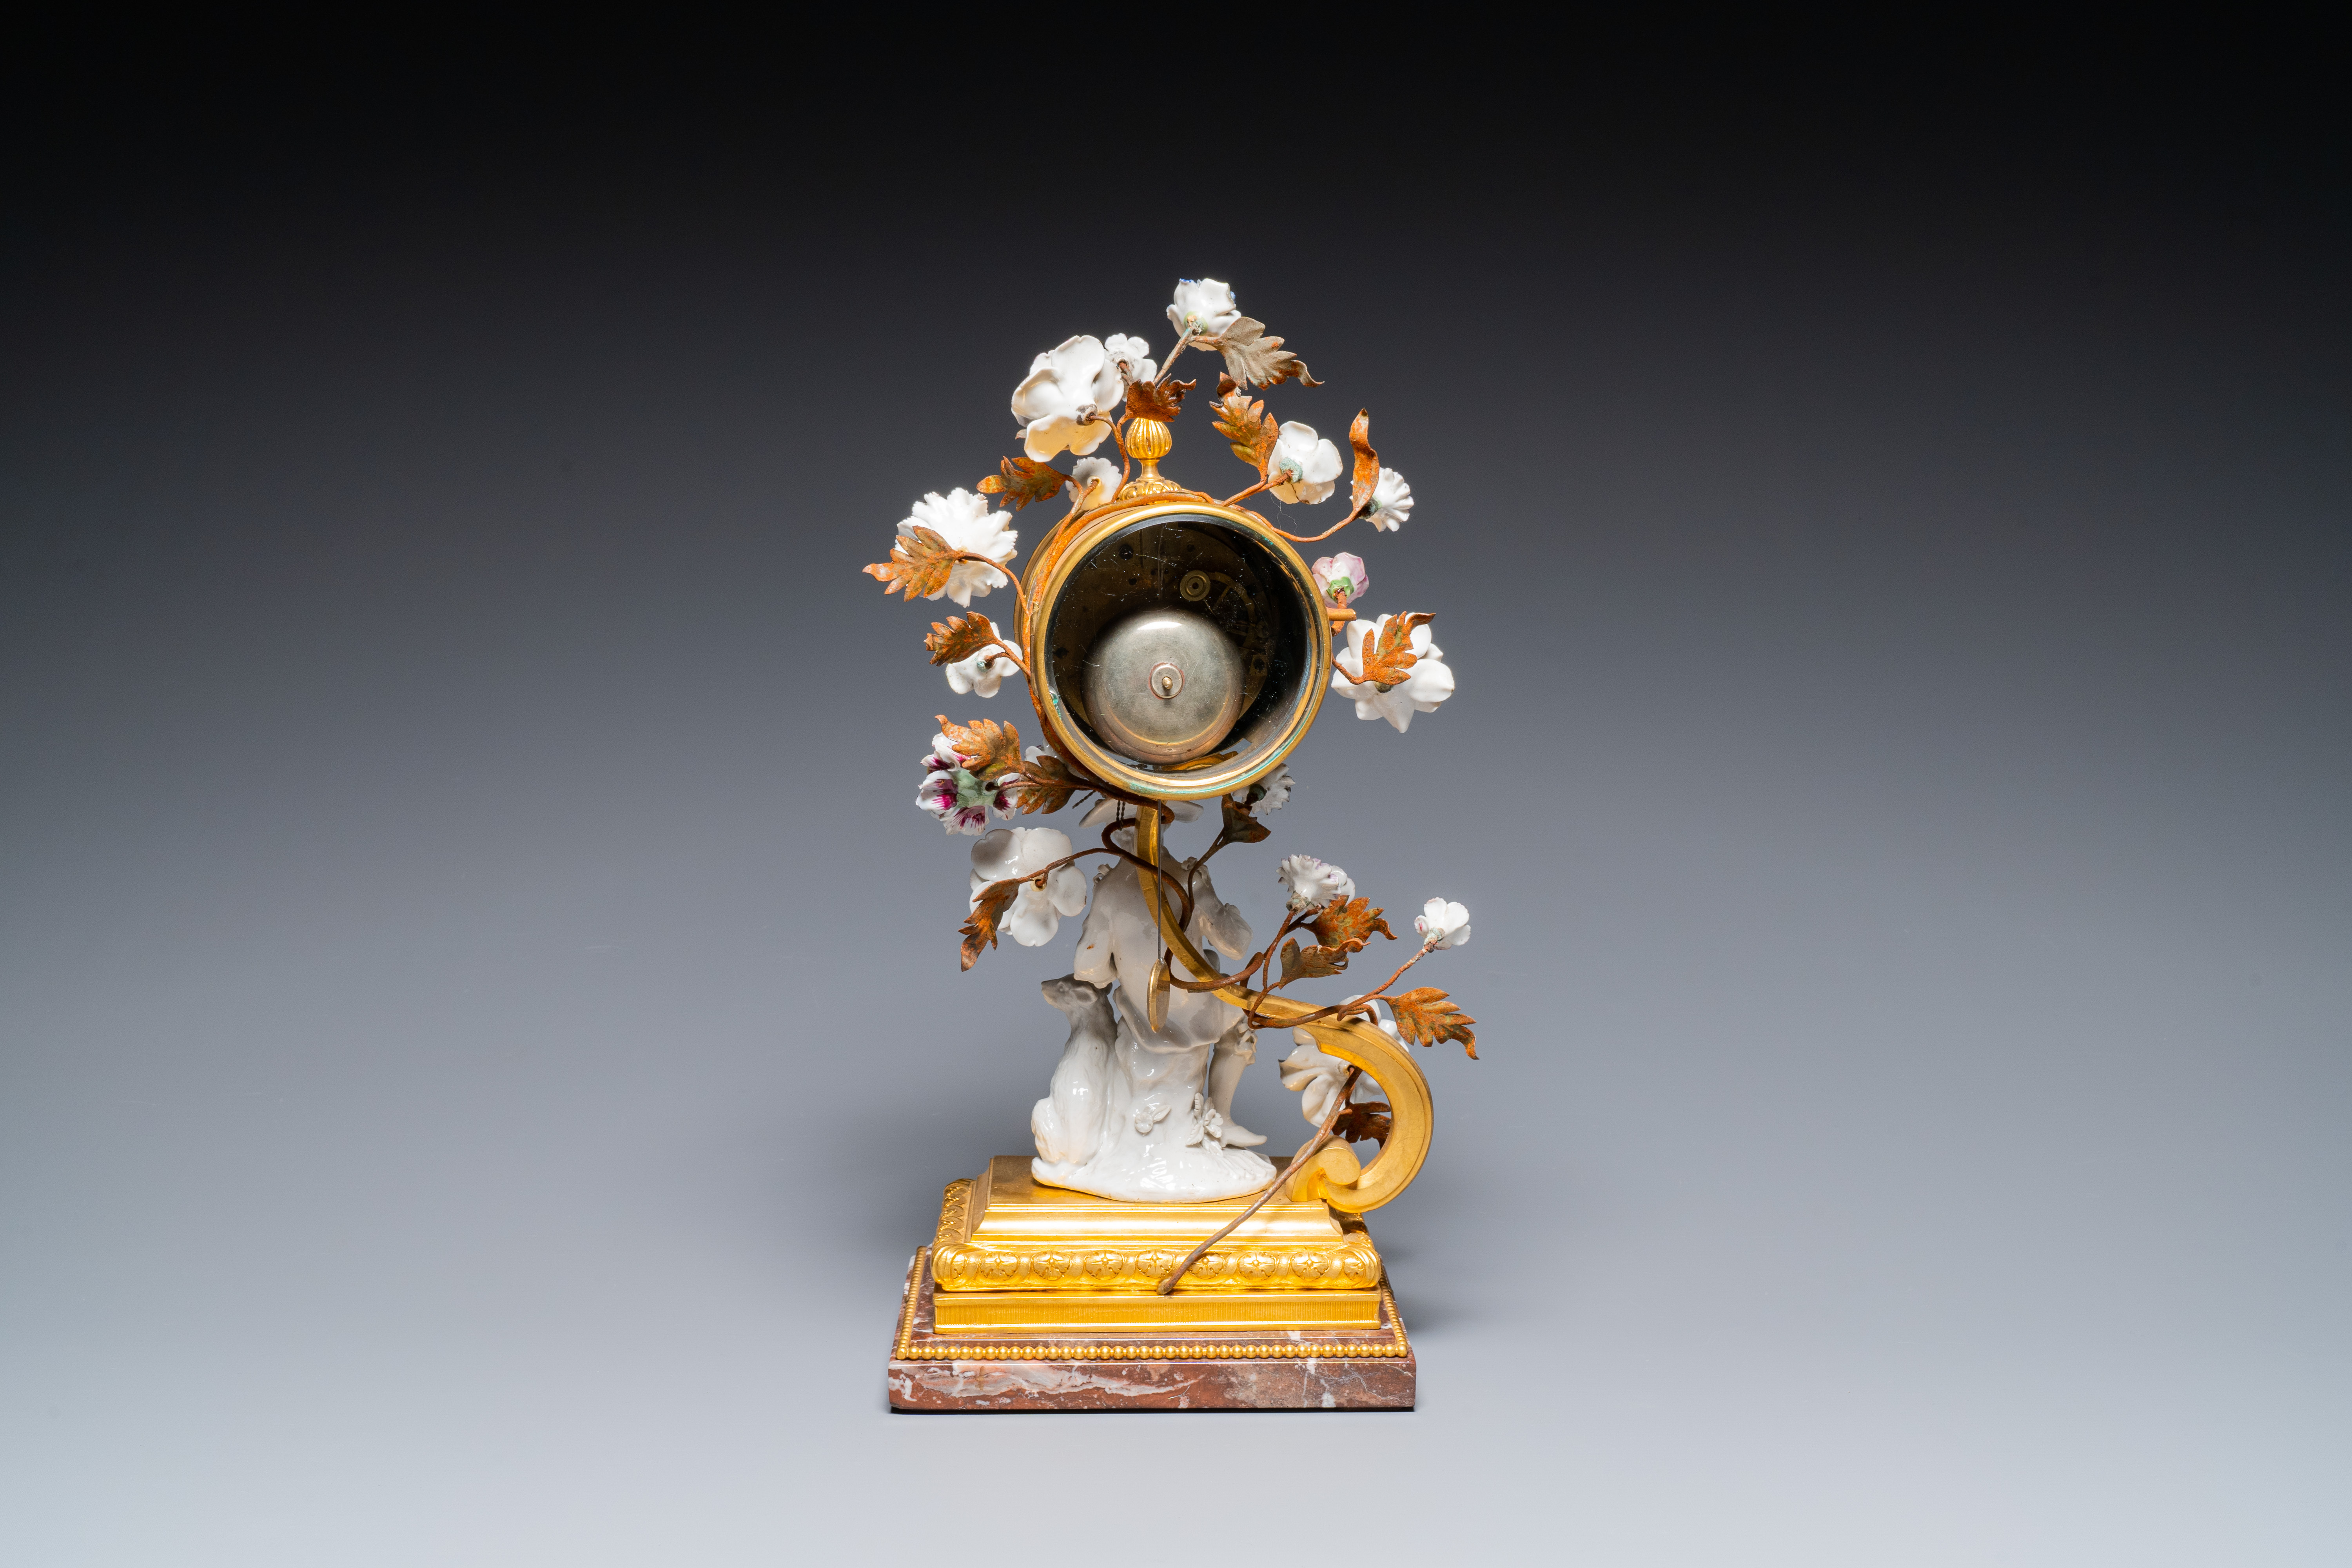 A French ormolu-mounted porcelain mantel clock, 18/19th C. - Image 10 of 28